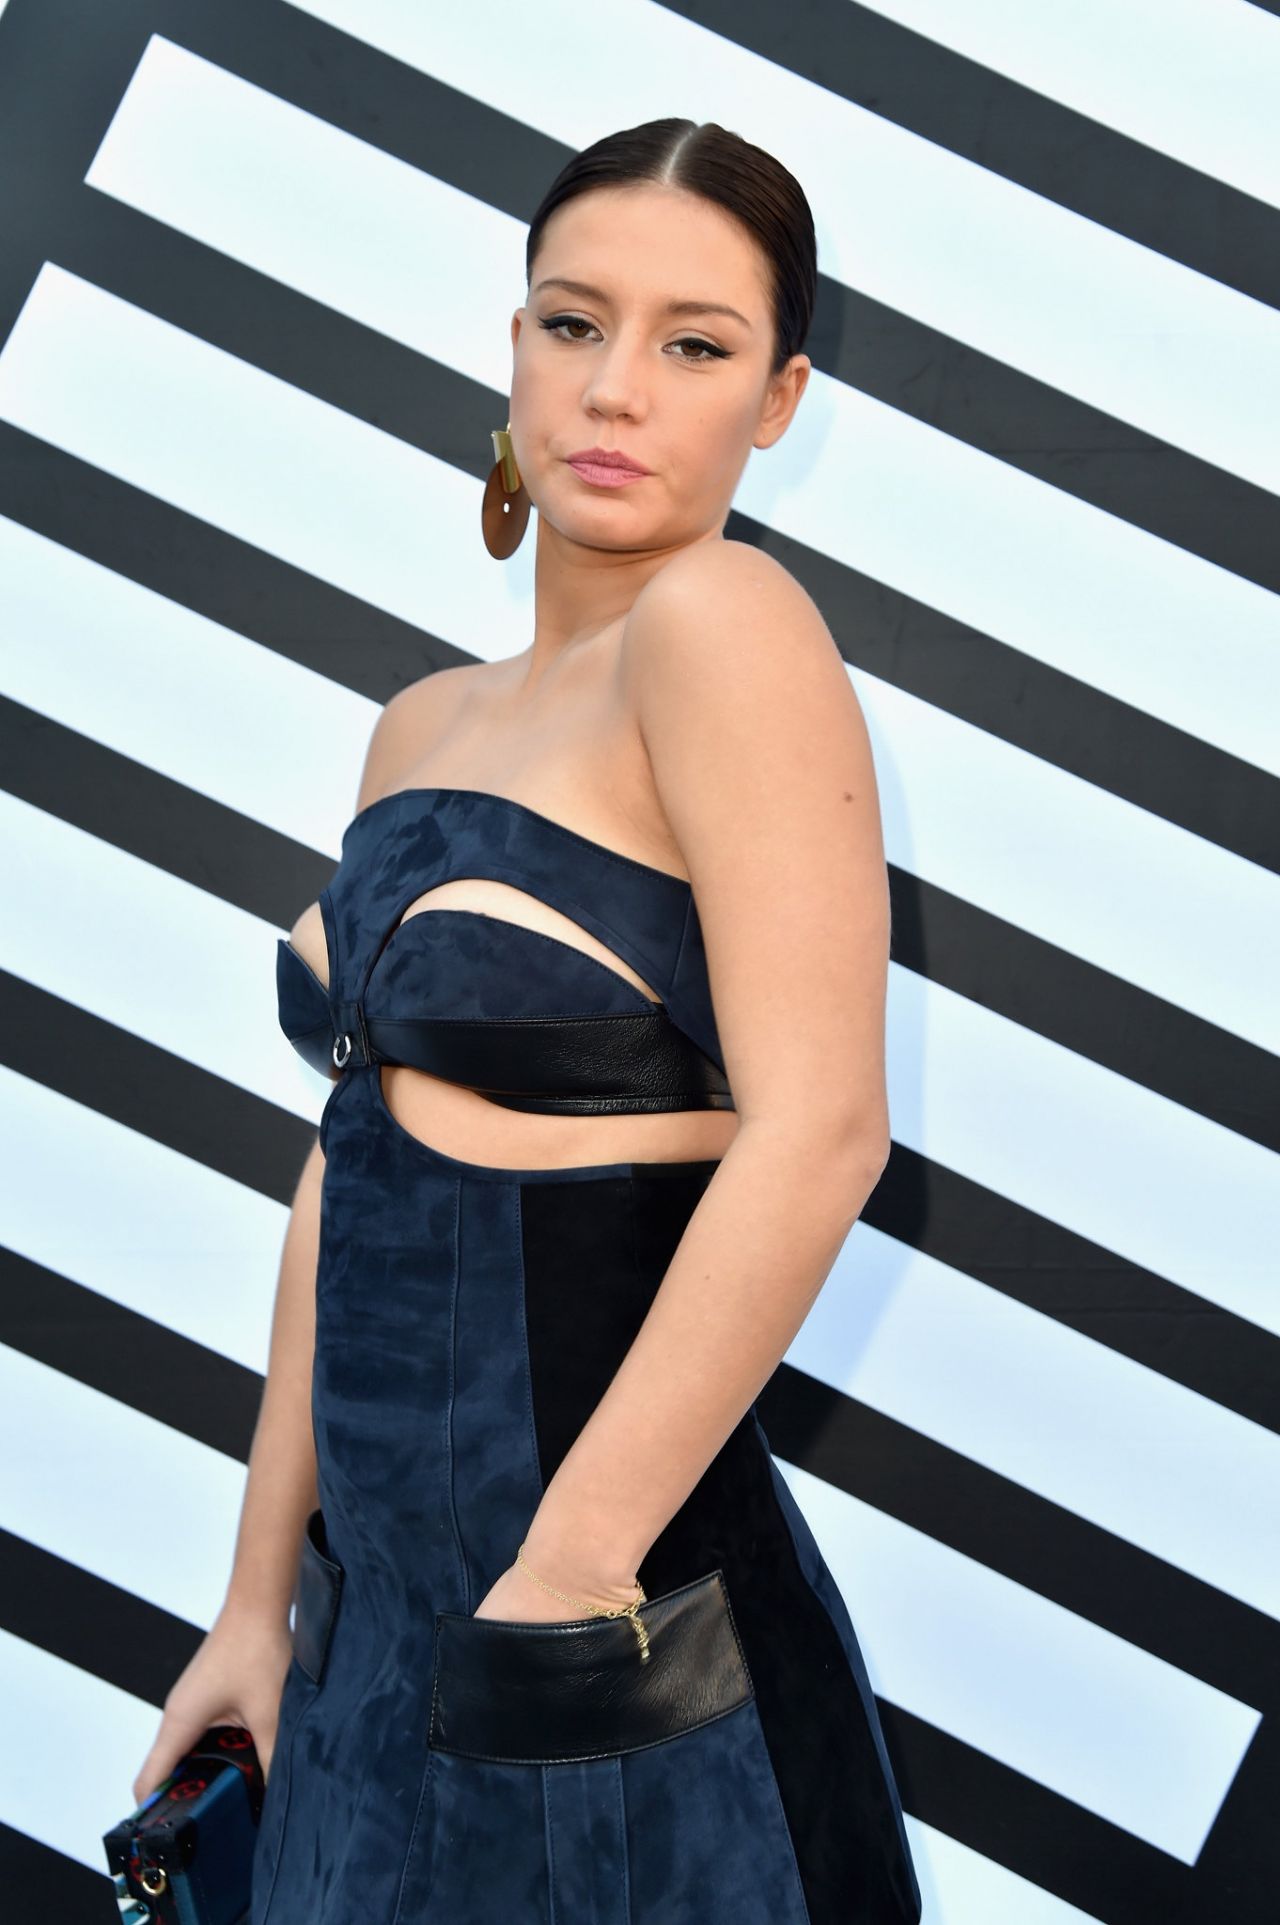 Louis Vuitton - Adèle Exarchopoulos dressed in Louis Vuitton at the MET  Gala 2015.